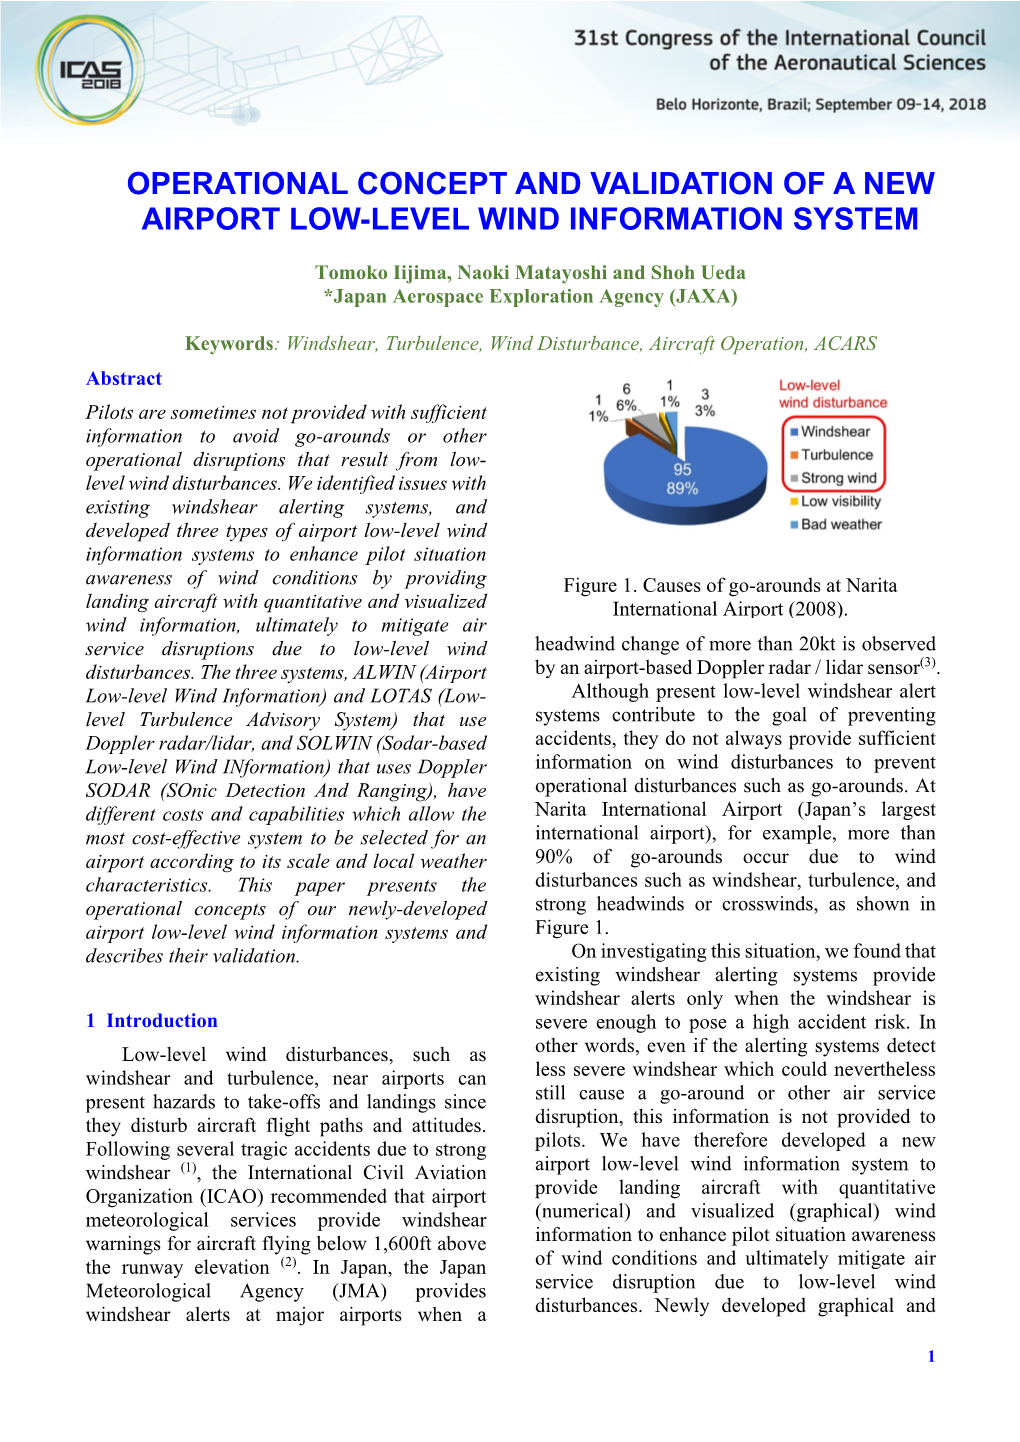 Operational Concept and Validation of a New Airport Low-Level Wind Information System